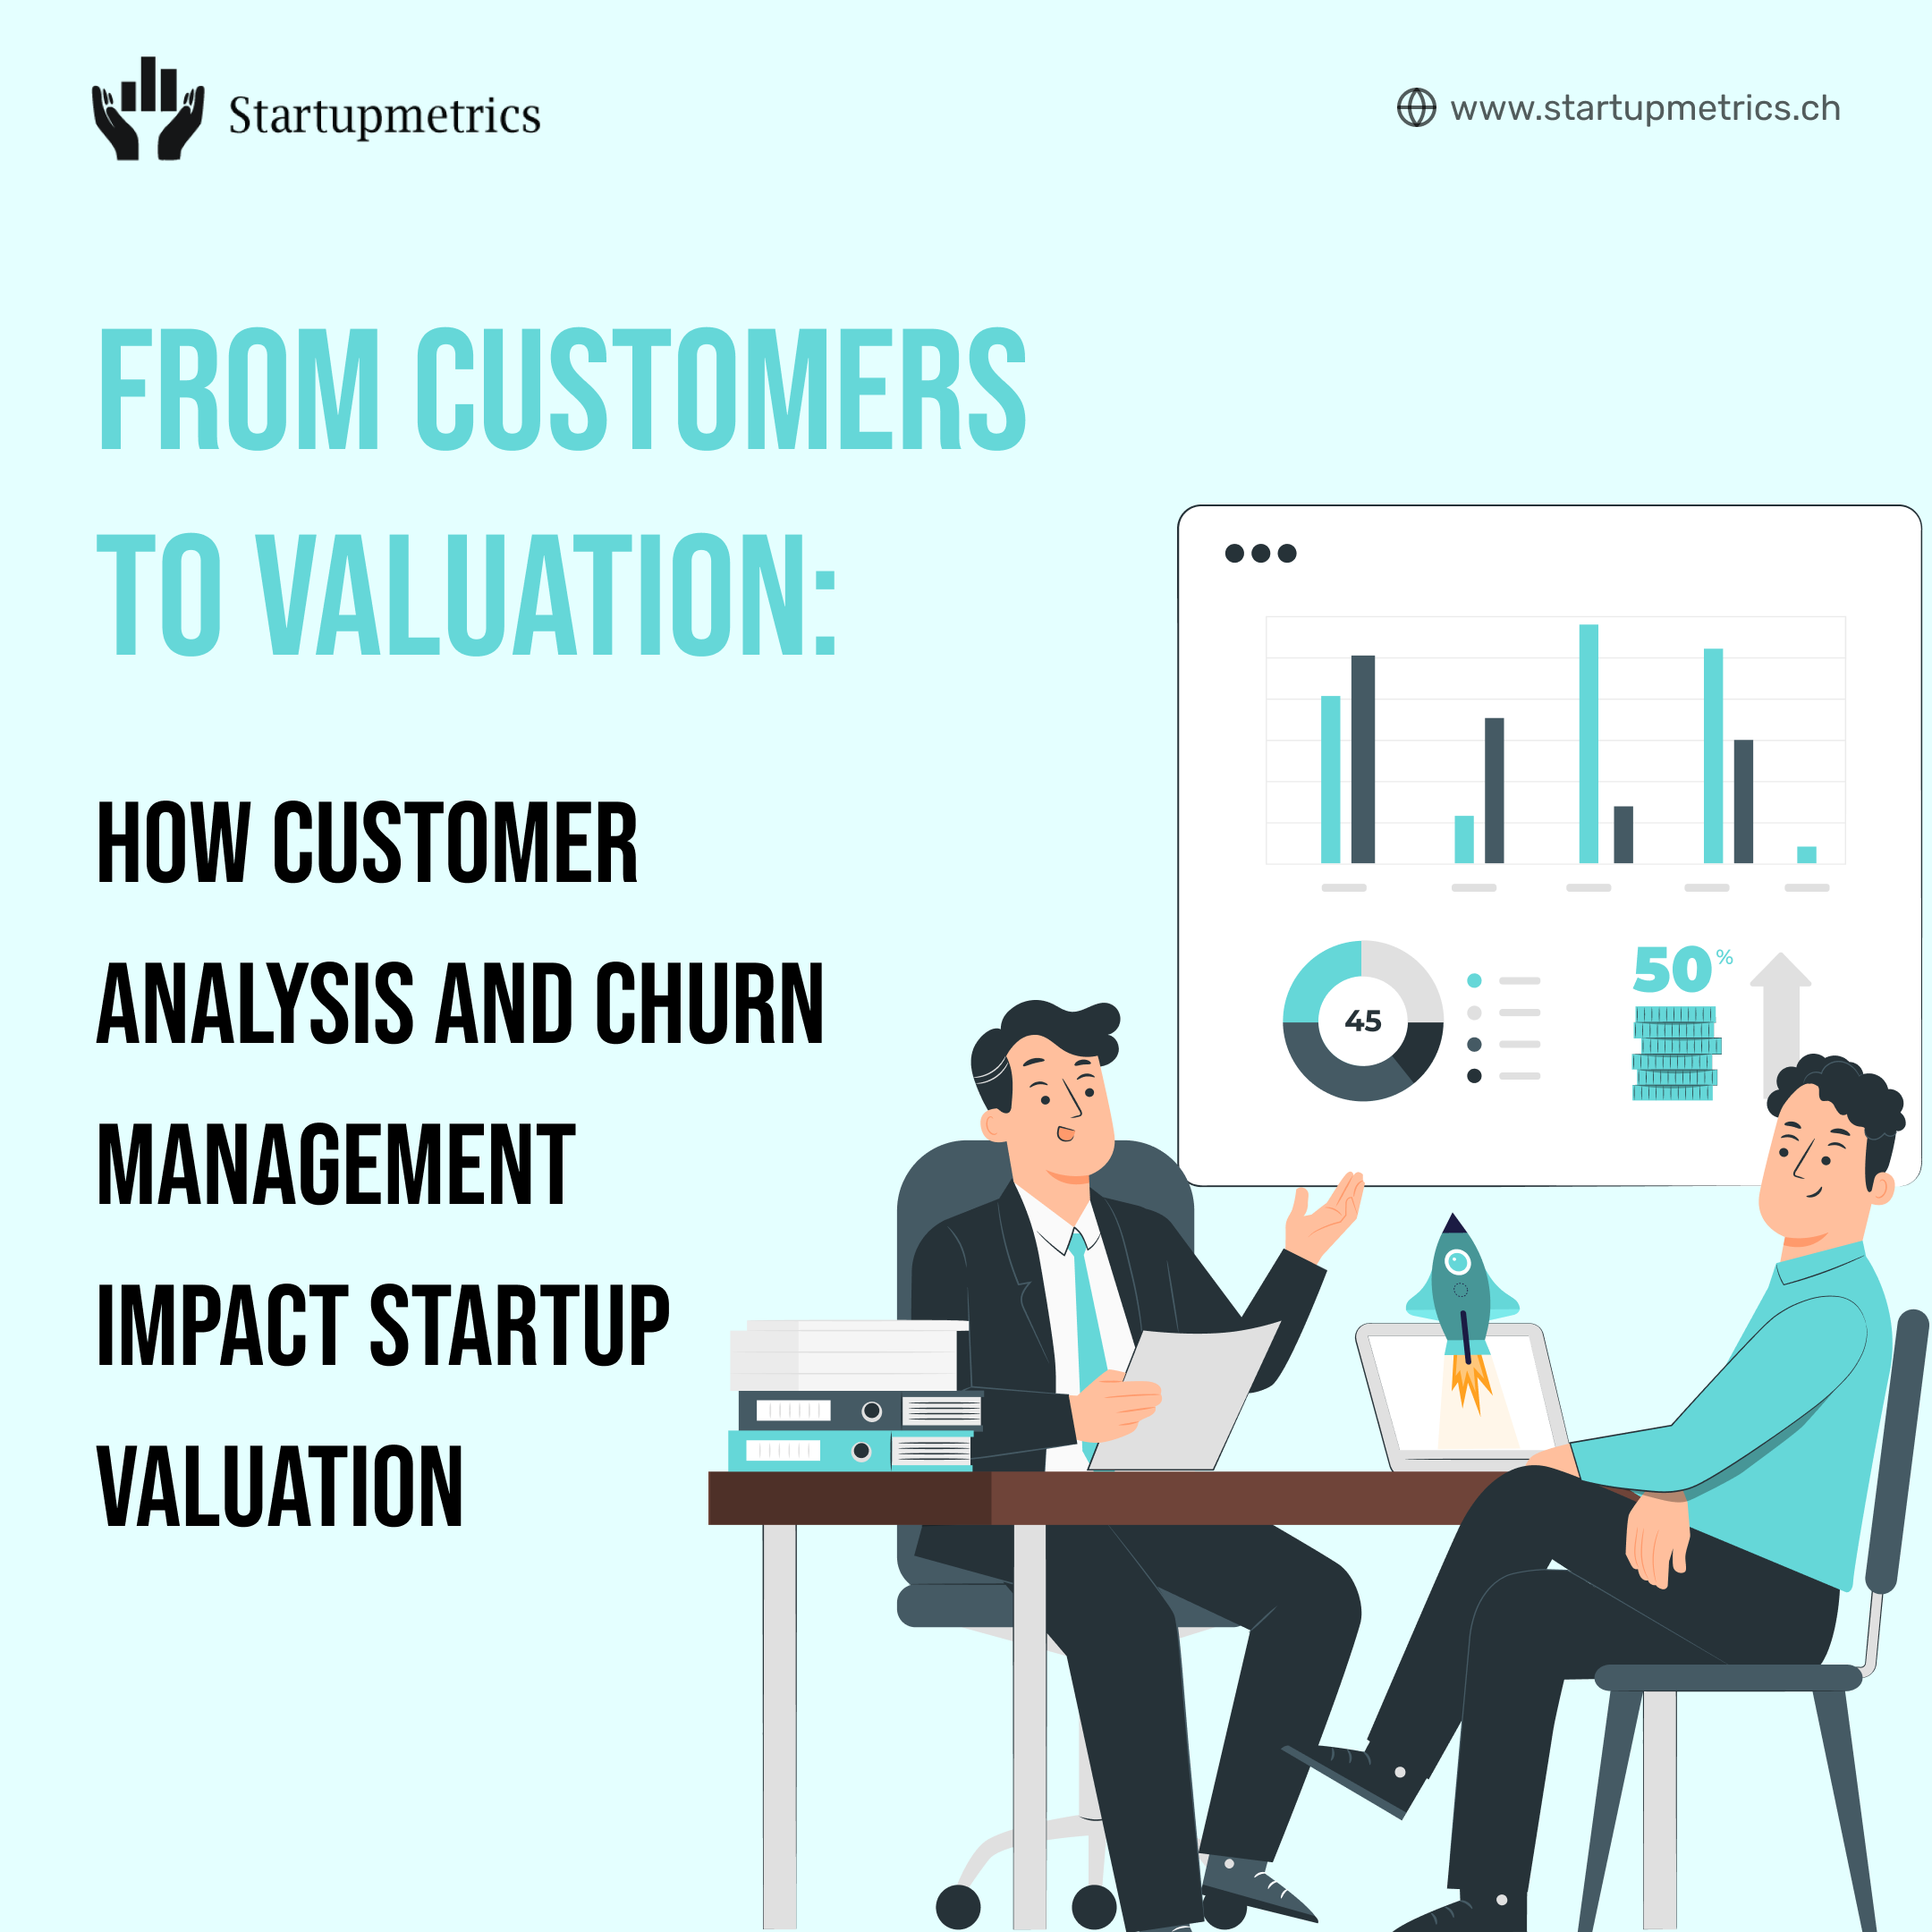 From Customers to Valuation: How Customer Analysis and Churn Management Impact Startup Valuation